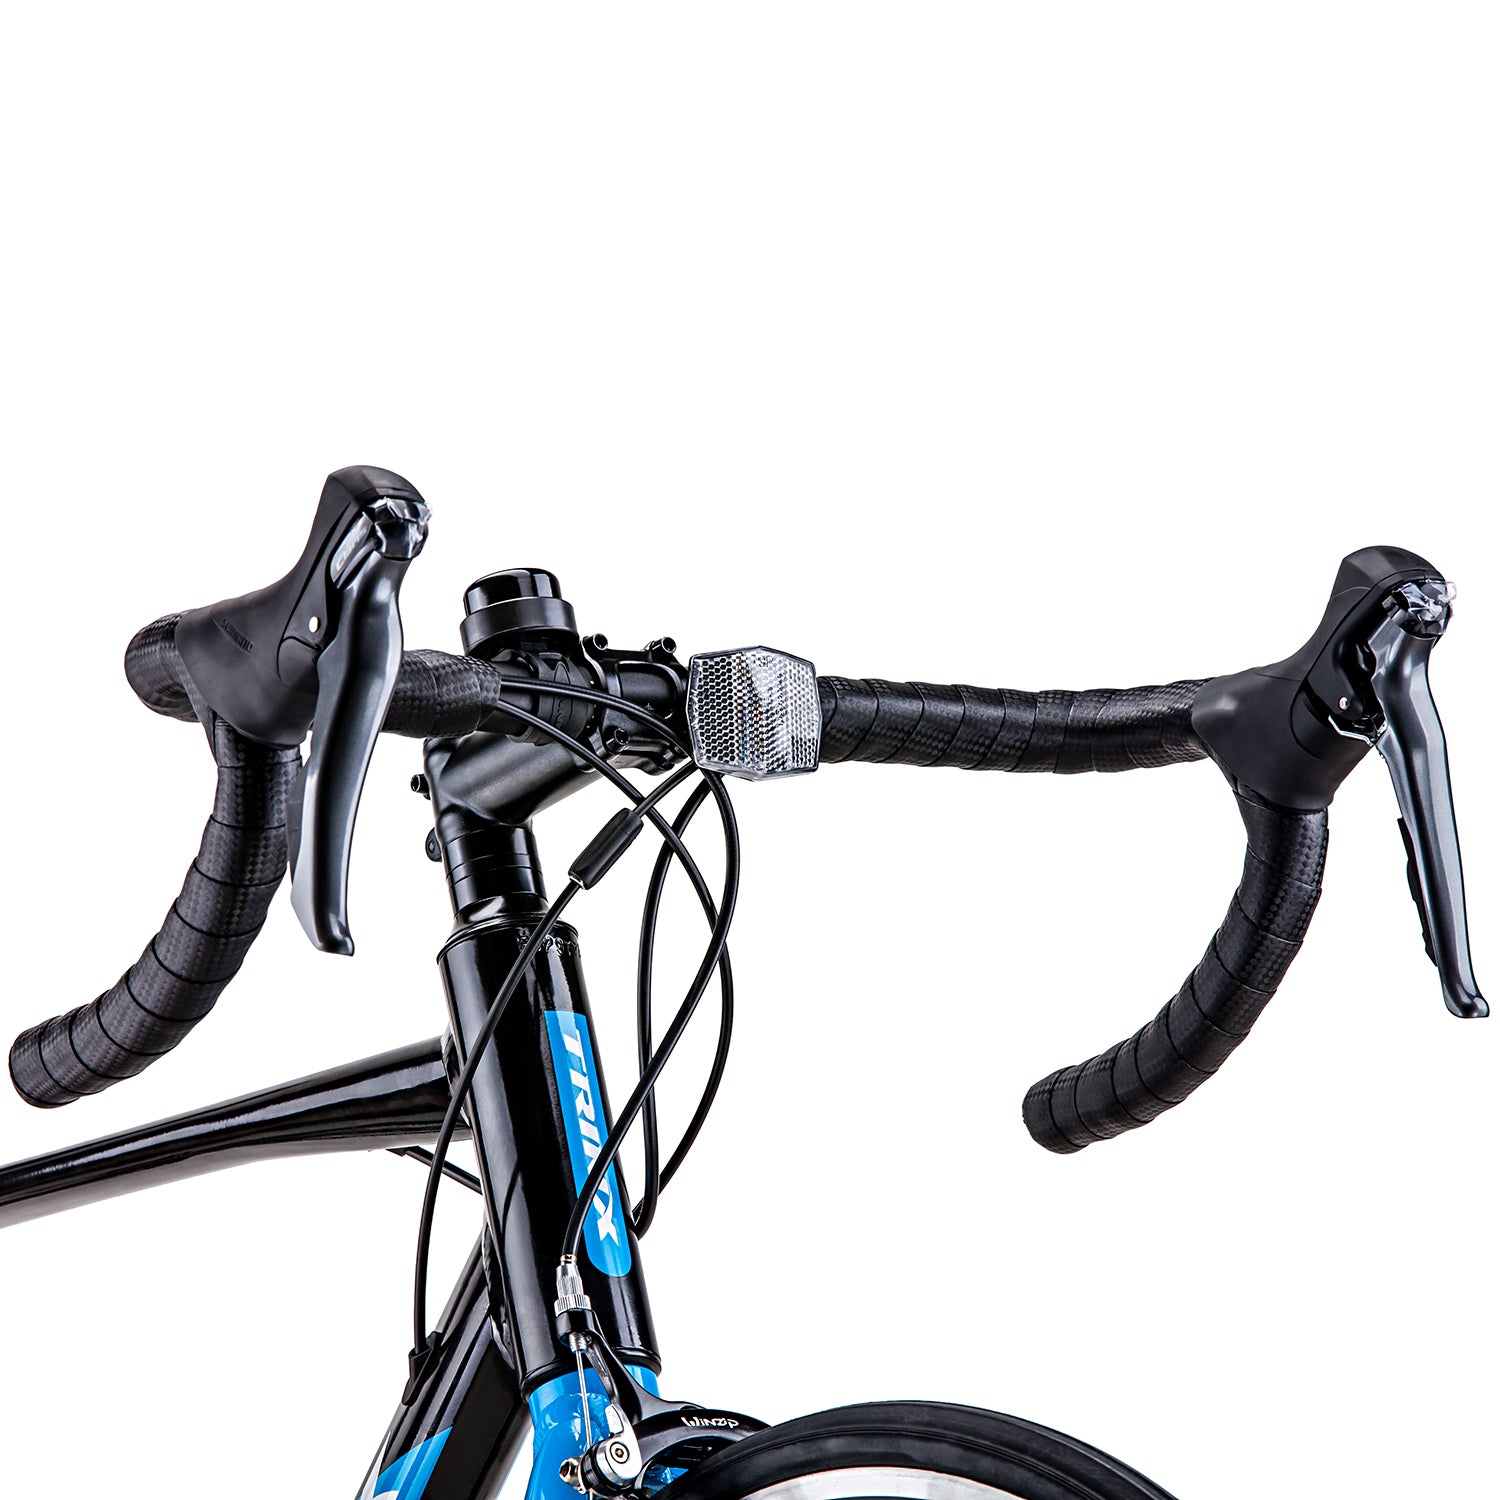 Handle of Trinx Road Bike Climber 2.0 Gravel Alloy 700C Special